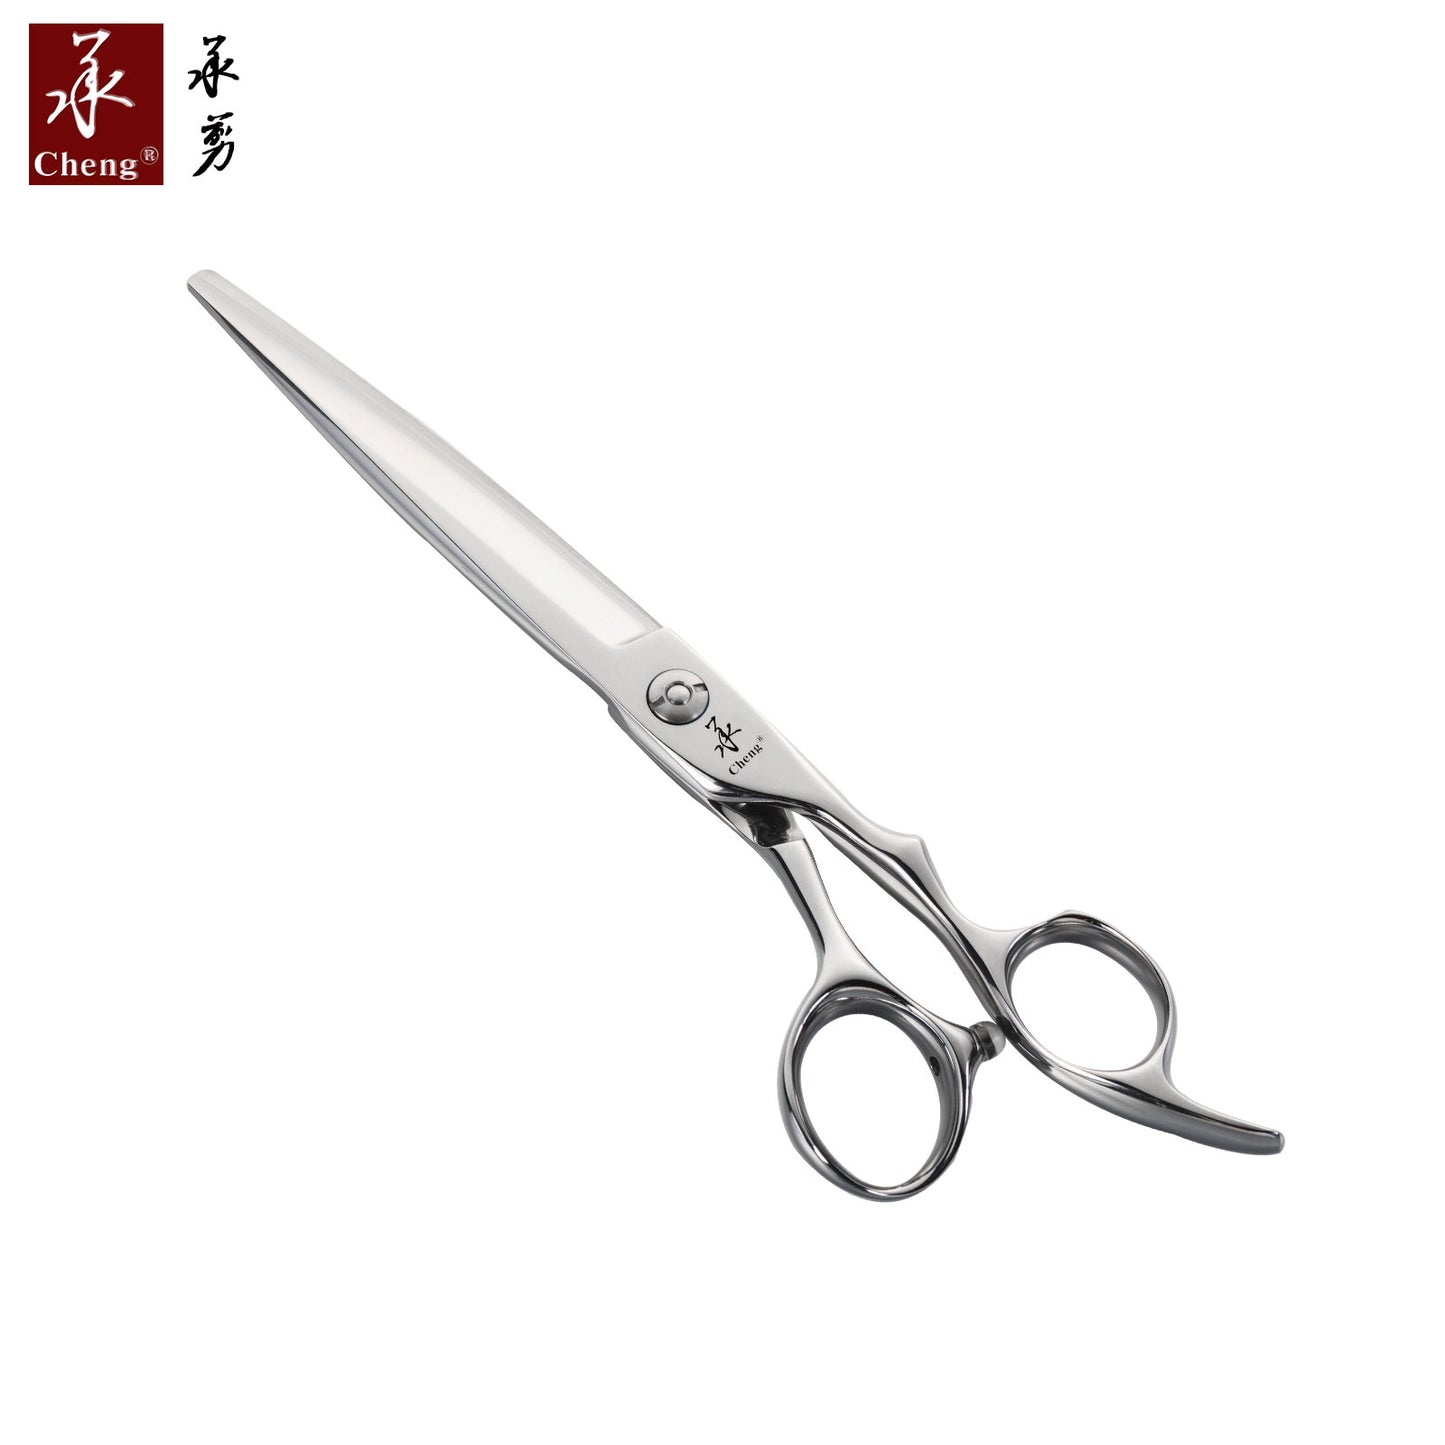 SY-626B 6 Inch 26Teeth Hair Thinning Scissors About=20%